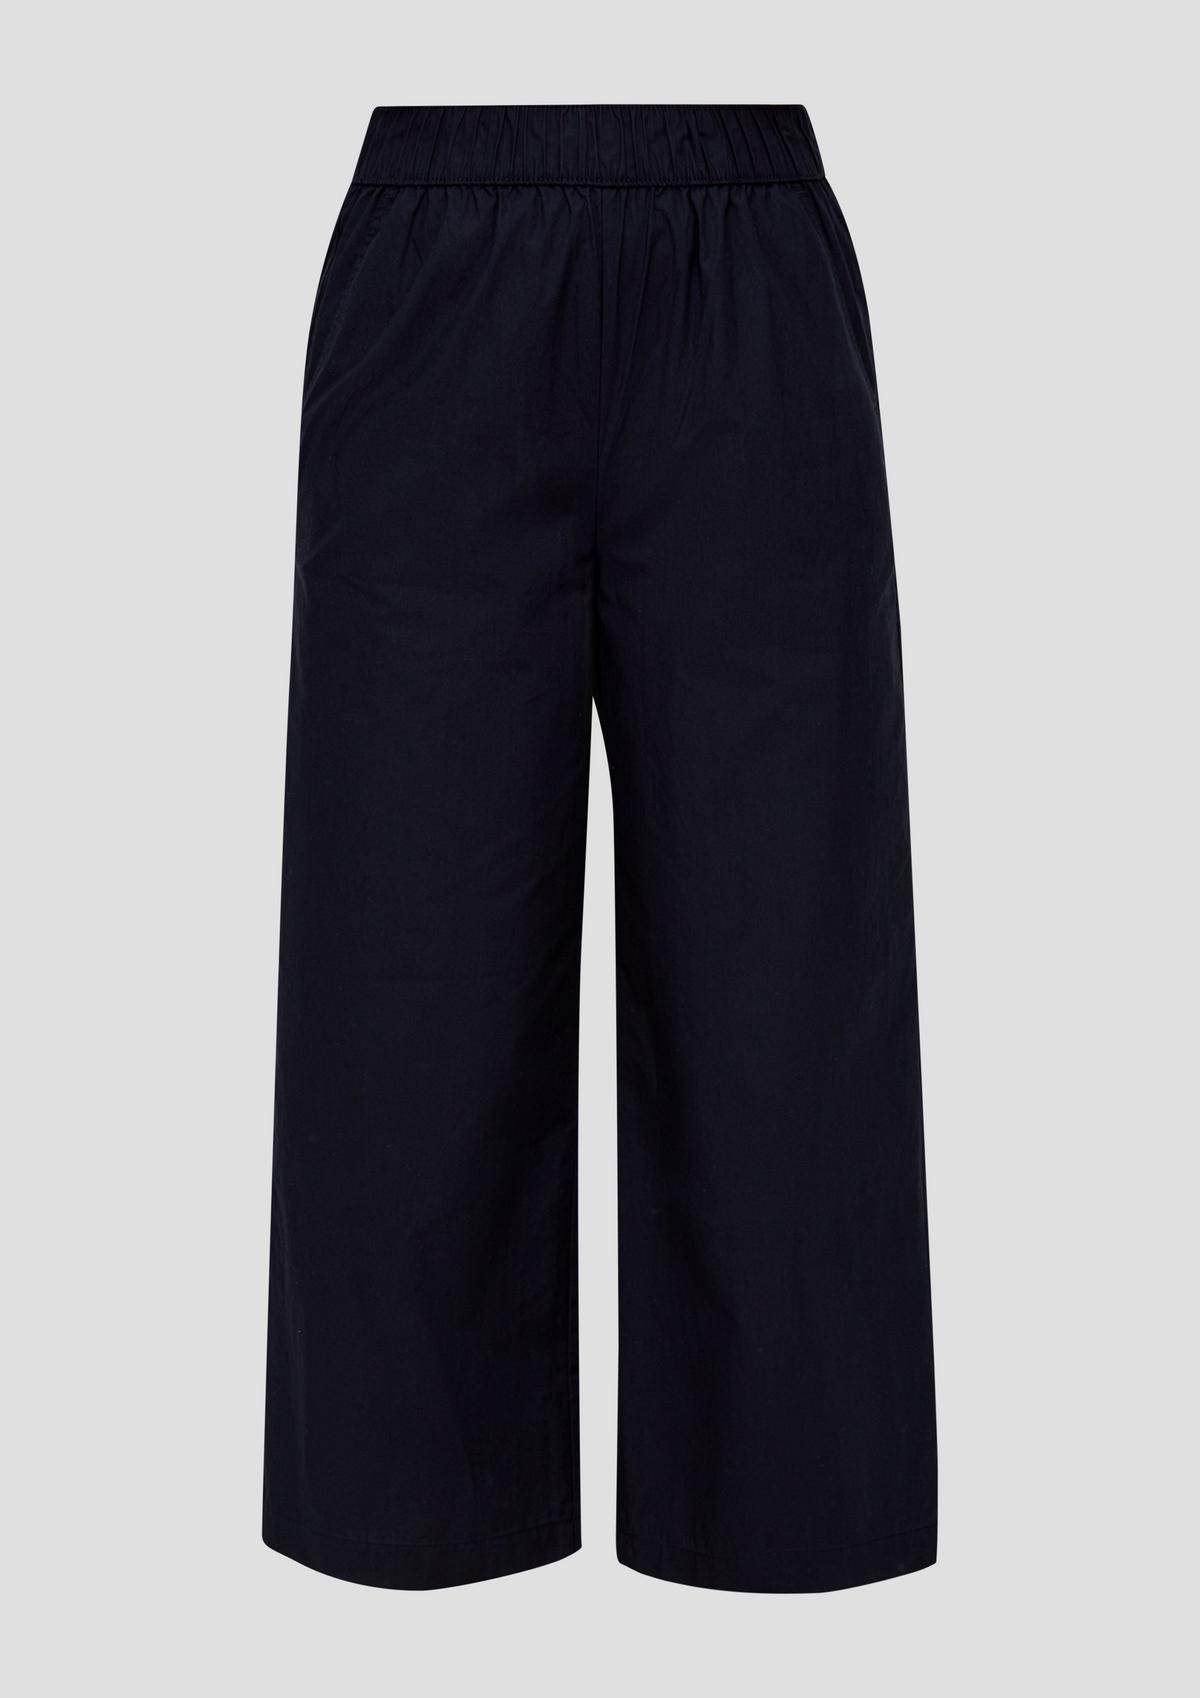 s.Oliver Relaxed : jupe-culotte en coton